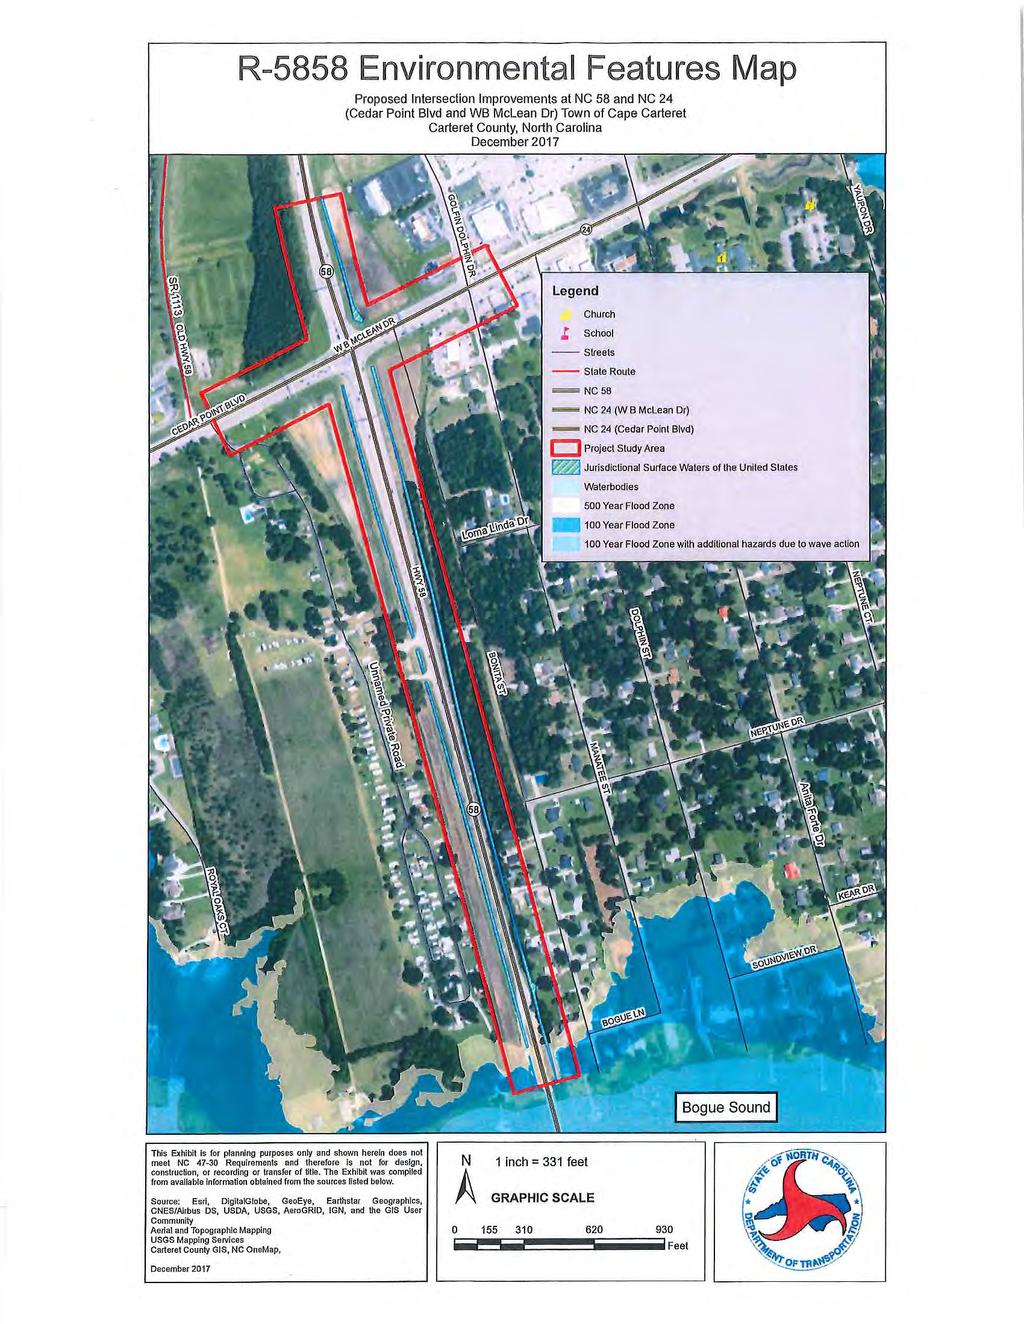 R-5858 Environmental Features Map Proposed Intersection Improvements at NC 58 and NC 24 (Cedar Point Blvd and WB McLean Dr) Town of Cape Carteret Carteret County, North Carolina December 2017 = NC 24